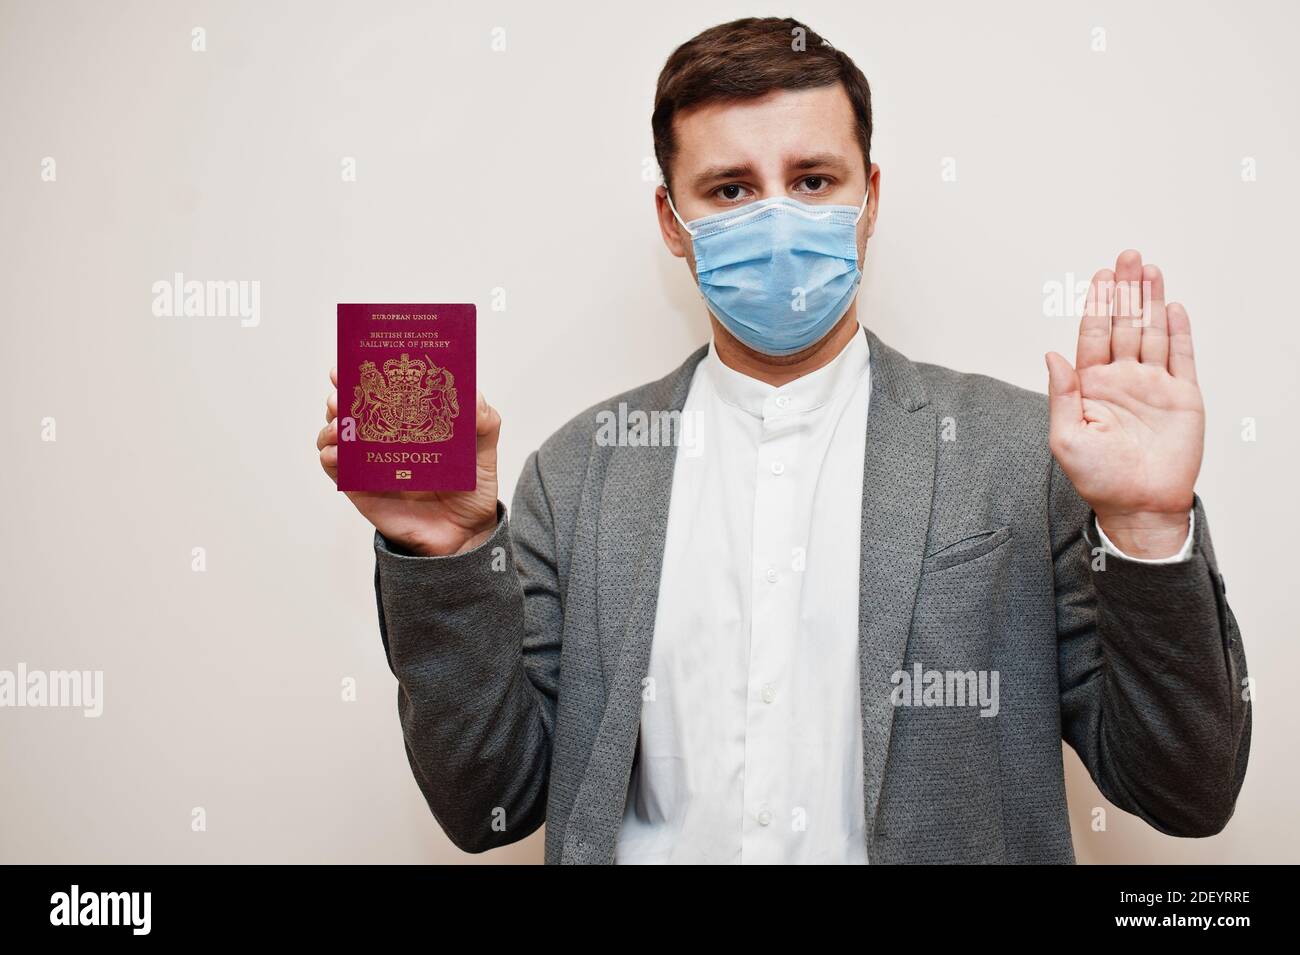 European man in formal wear and face mask, show Bailiwick of Jersey passport with stop sign hand. Coronavirus lockdown in Europe country concept. Stock Photo